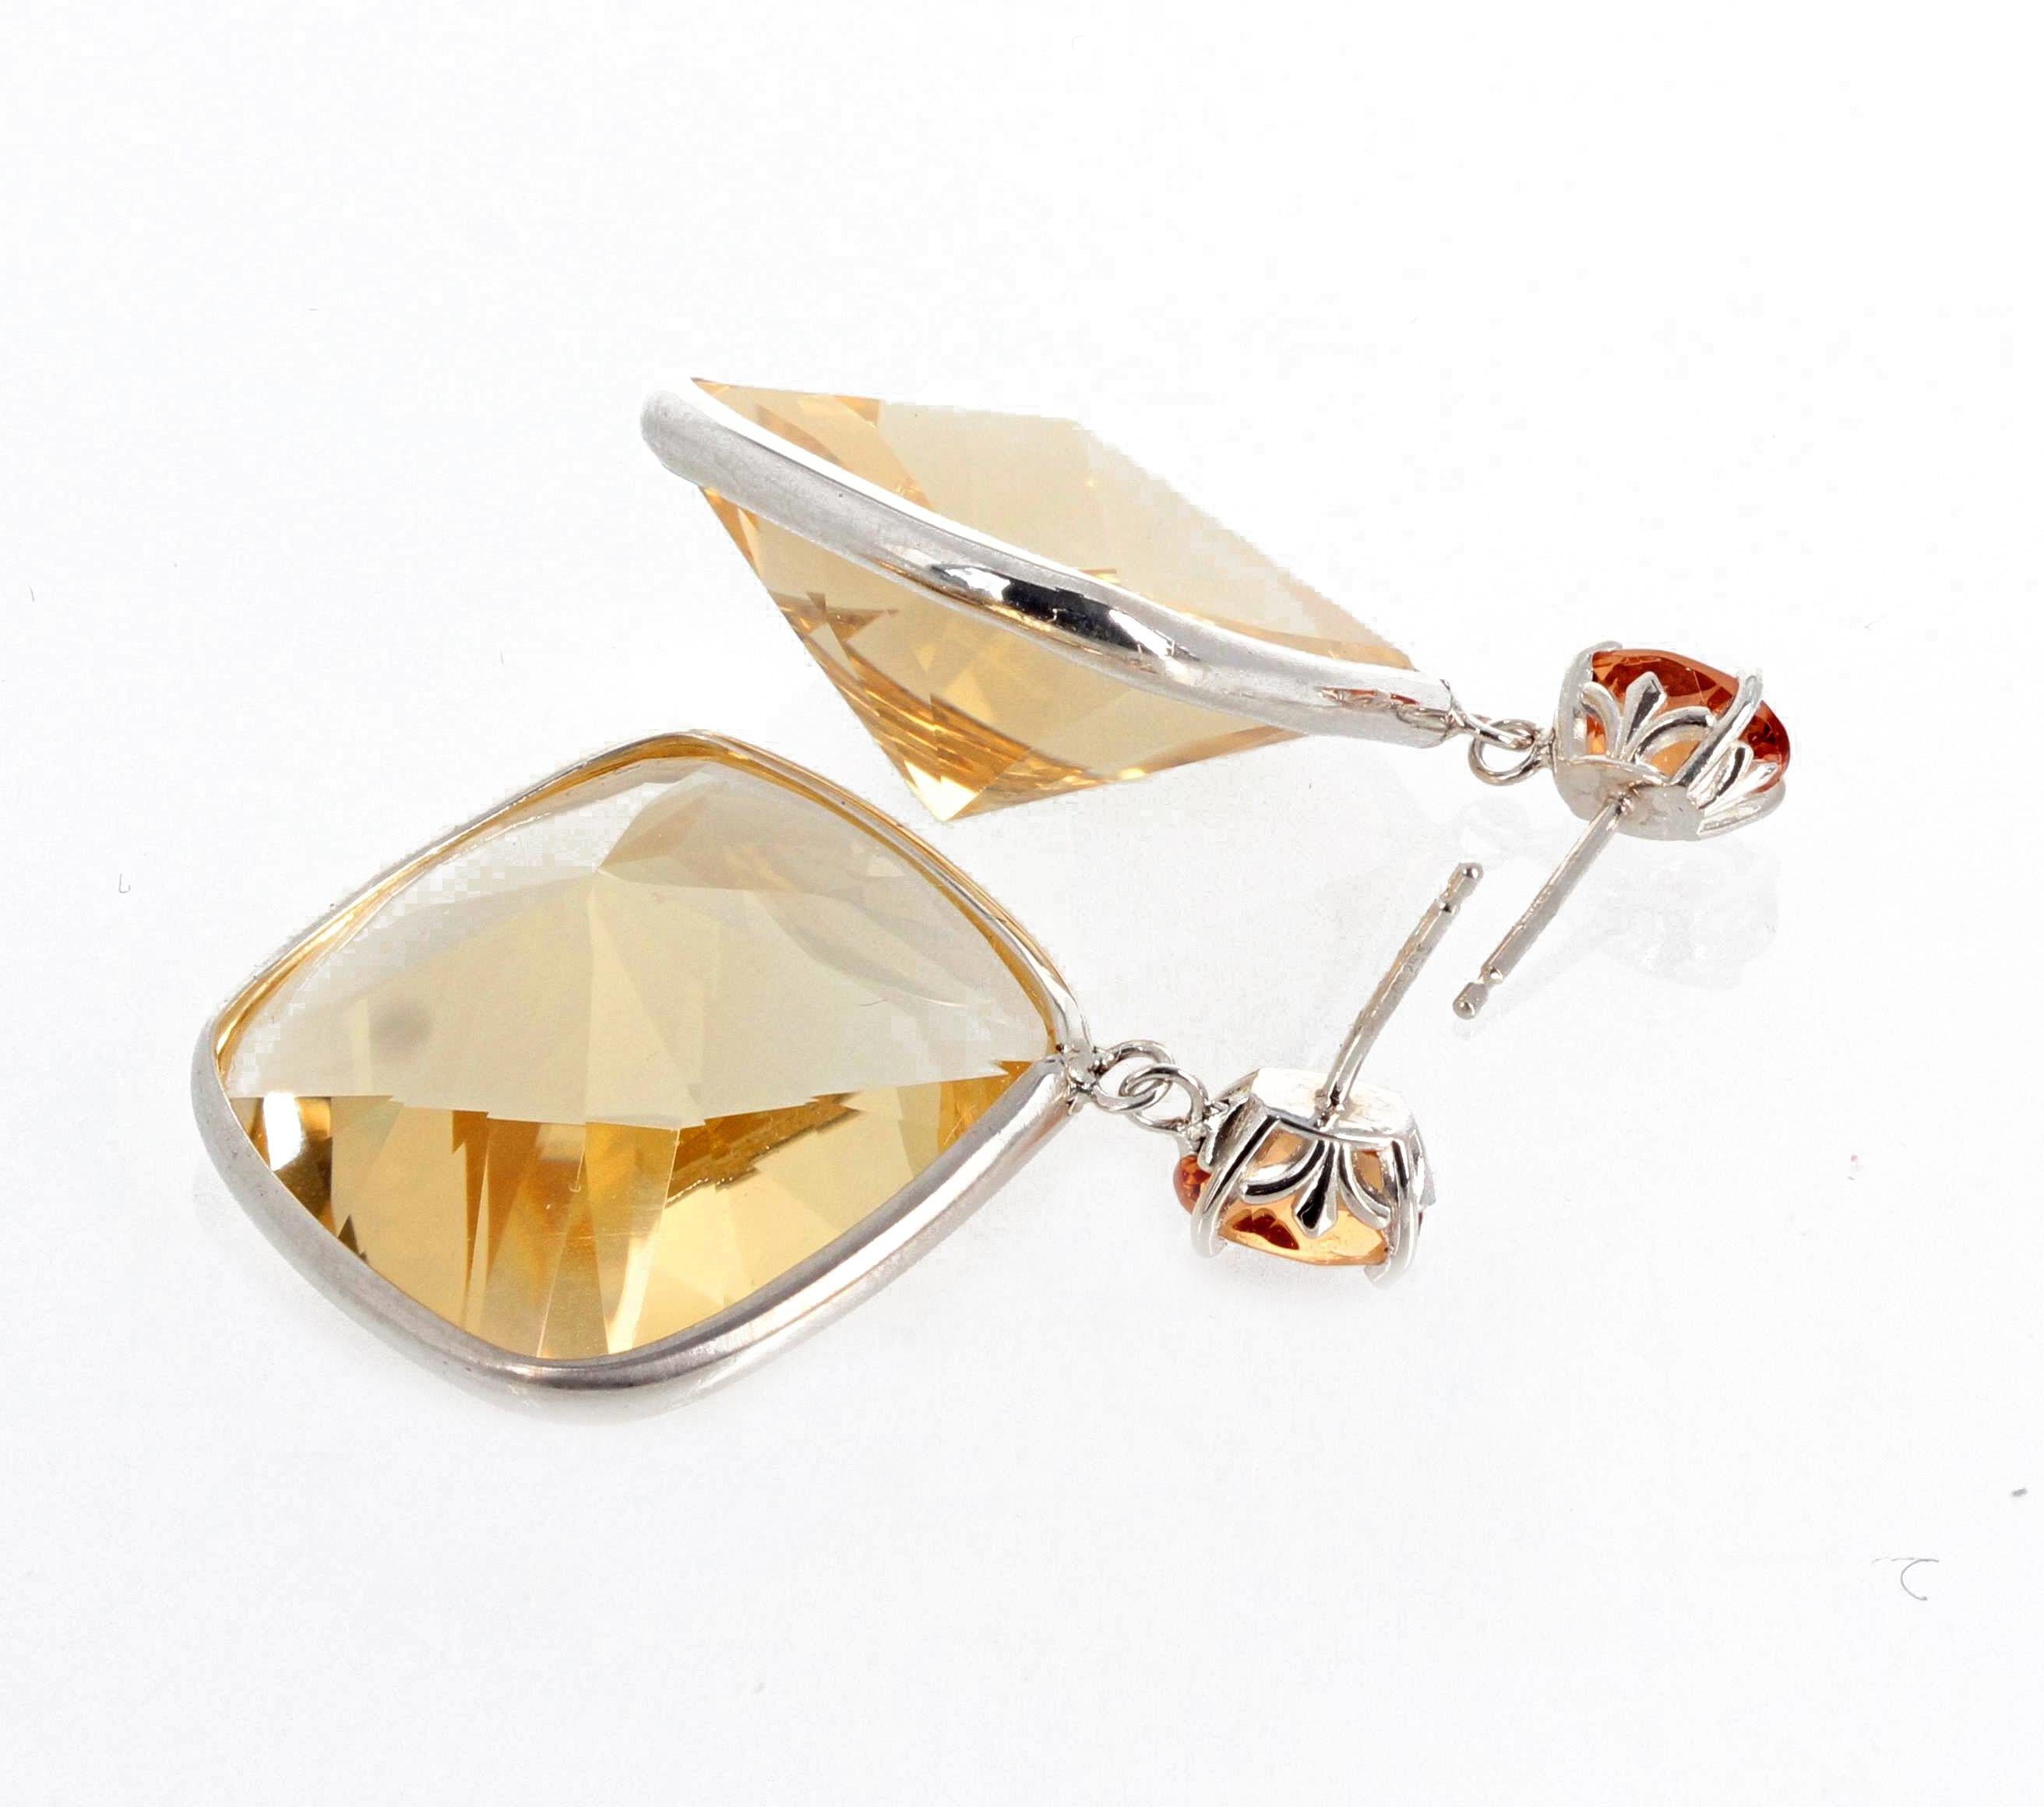 The brilliant smaller Citrine gemstone on top are 0.66 carats each ( 7.2mm x 5.2mm) and the large glittering lighter Citrines all set in sterling silver are 26 carats each (20mm x 20mm).  These gemstones are cut so as to glitter brilliantly in all